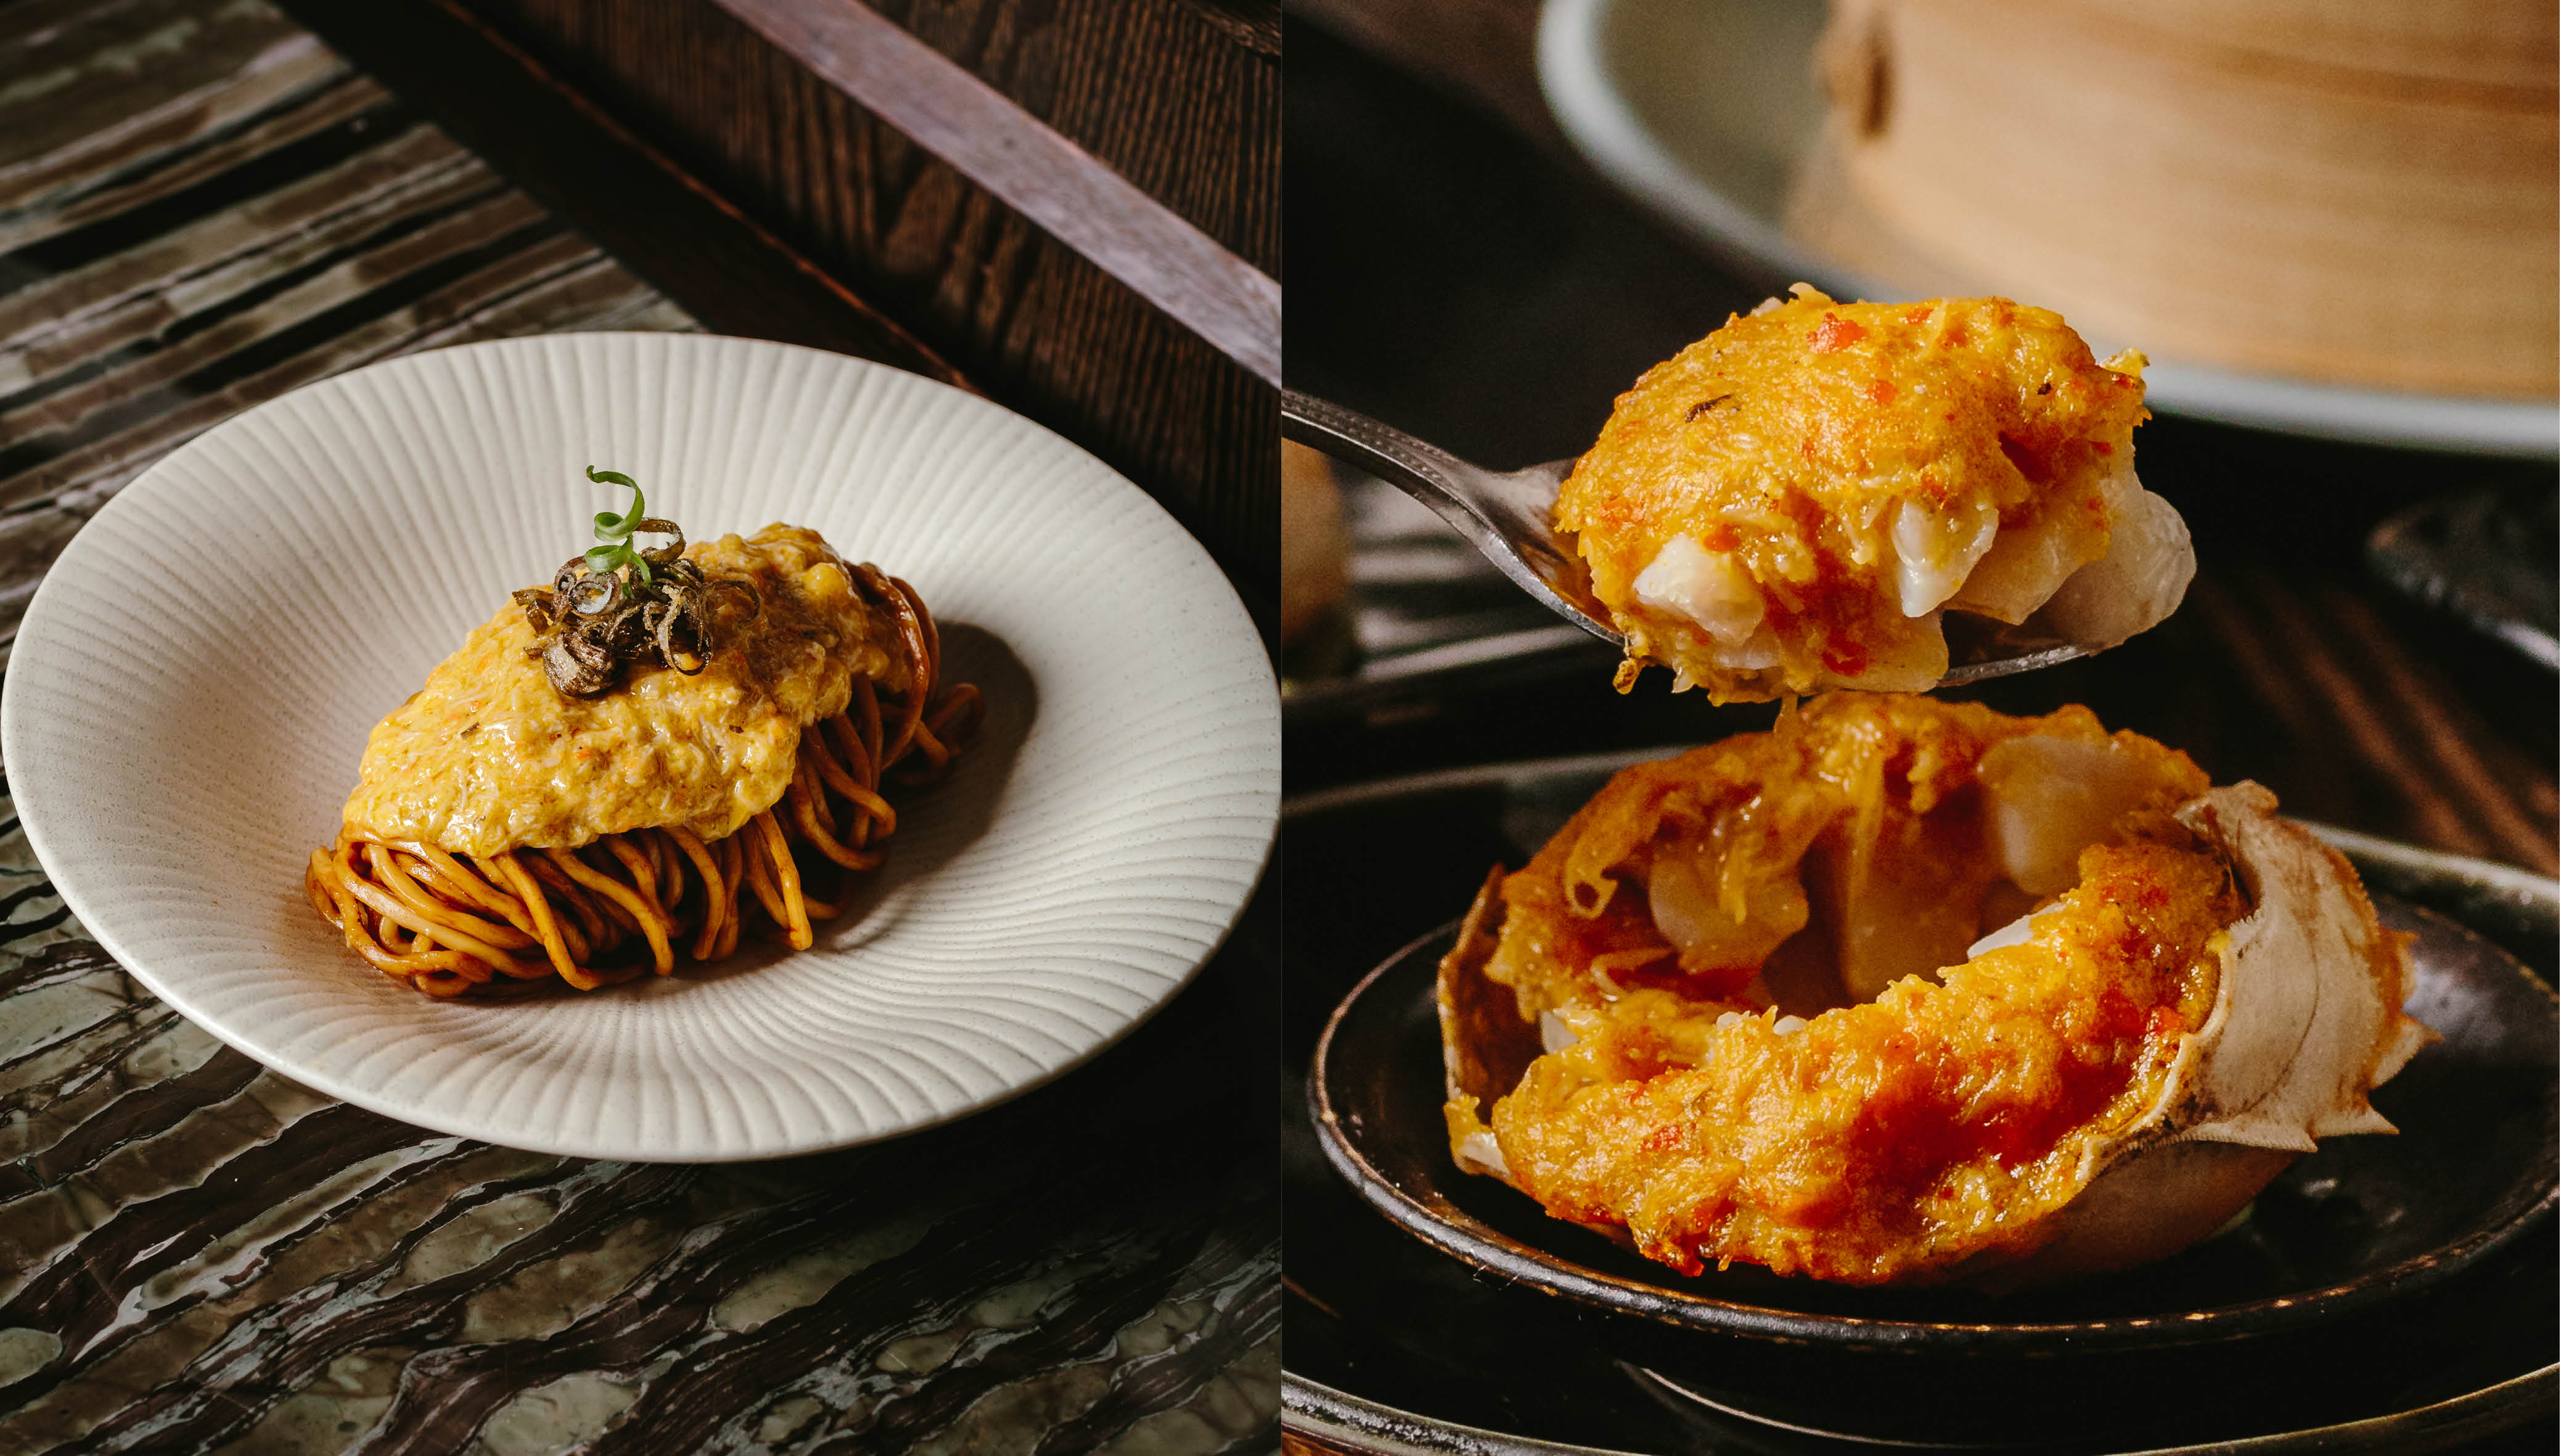 Mott 32's Tossed Shanghainese Noodles with Hairy Crab Roe (left) and baked Mandarin fish in hairy crab shell (right)